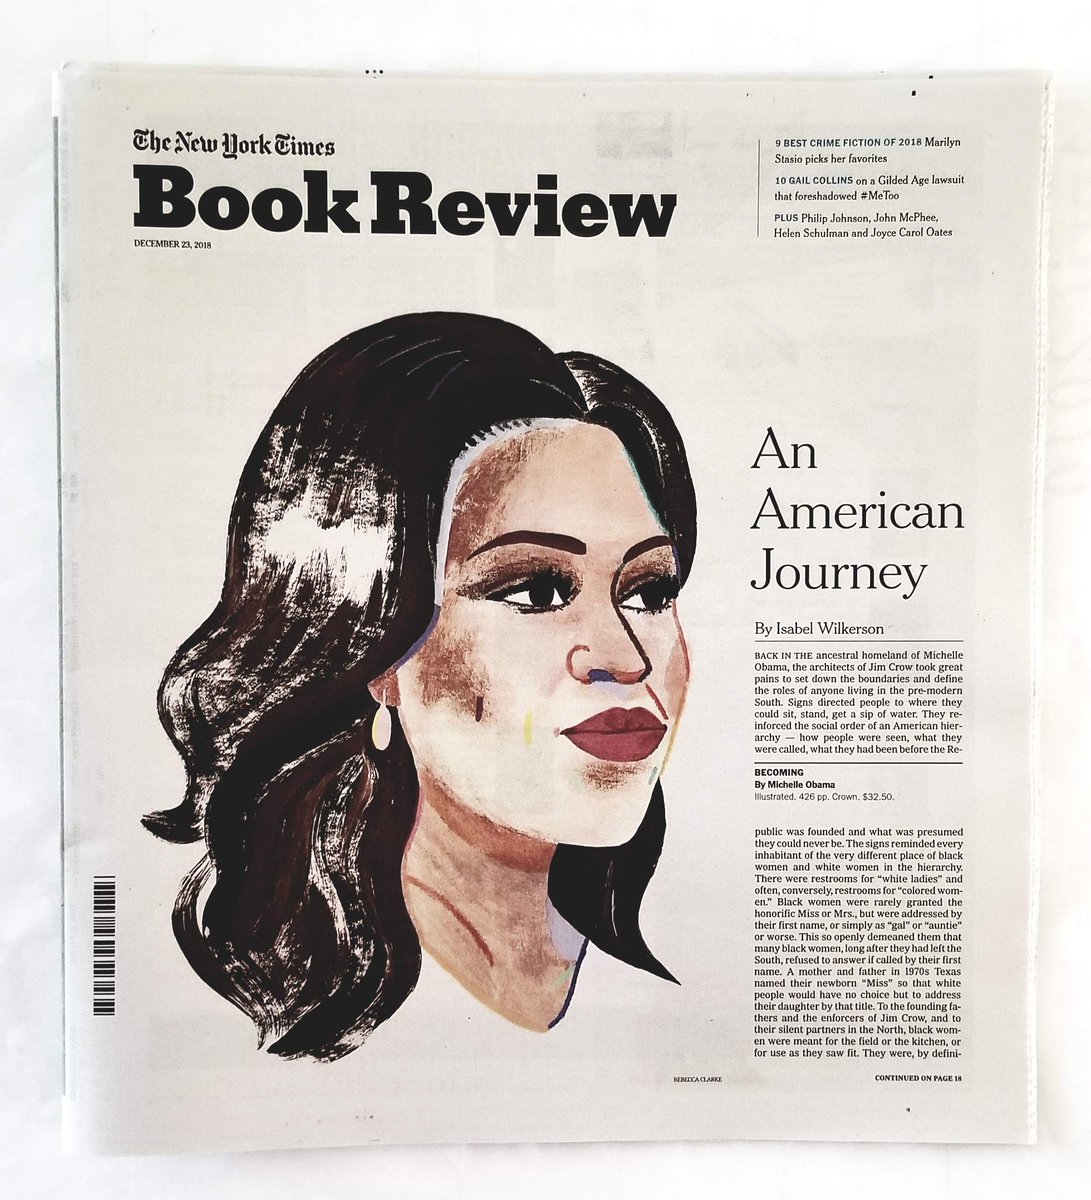 10) A subscription to a book review. We really need book reviews to stay in business. The physical  @nytimesbooks in itself is pretty pricey, but maybe that makes it a nice gift for someone you adore...